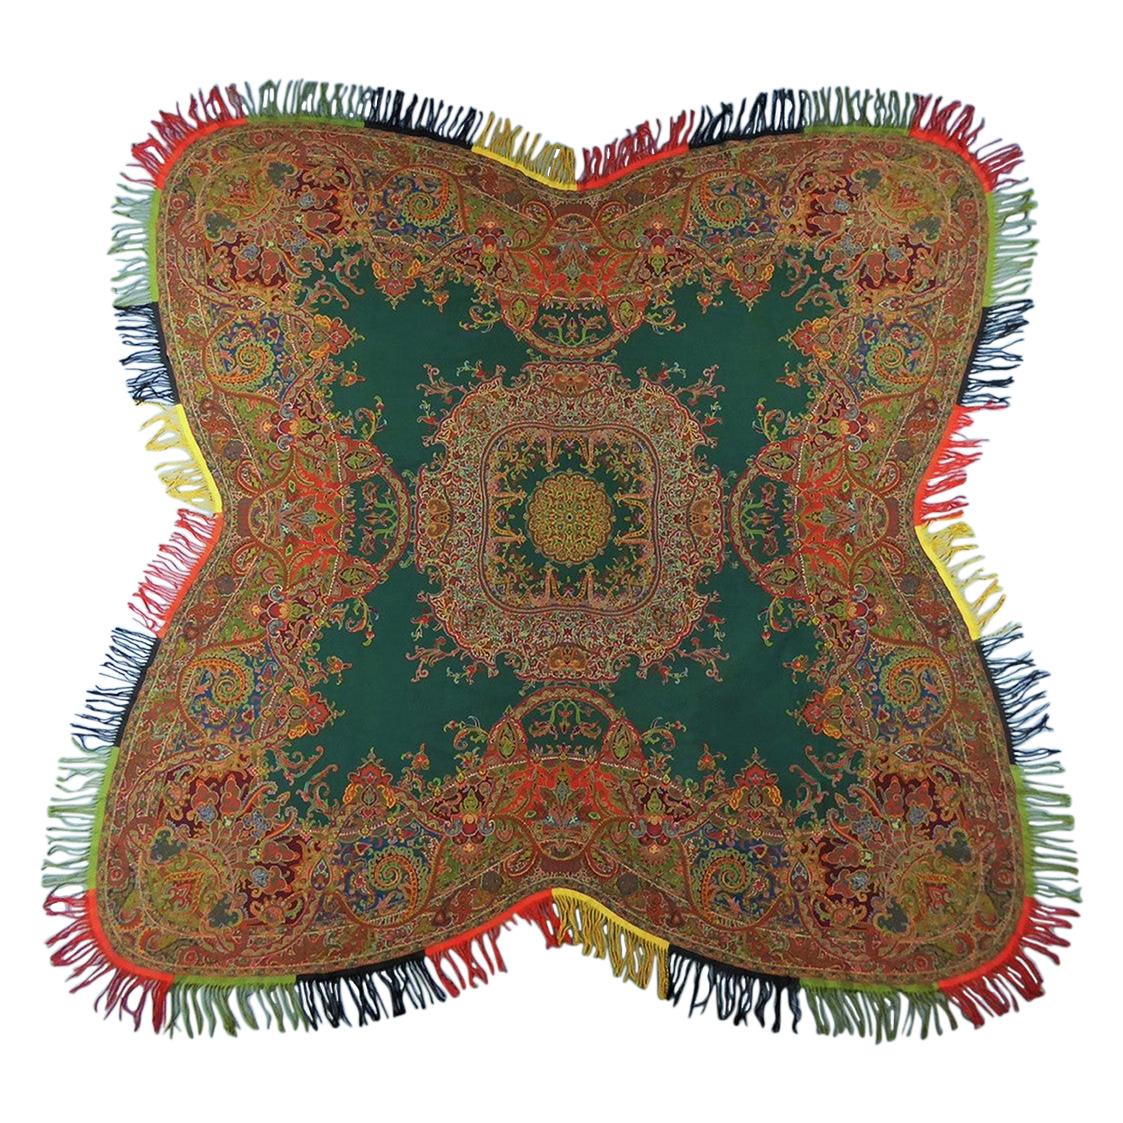 French Paisley Shawl called Palatin – Manufacture Fortier – Paris Circa 1839